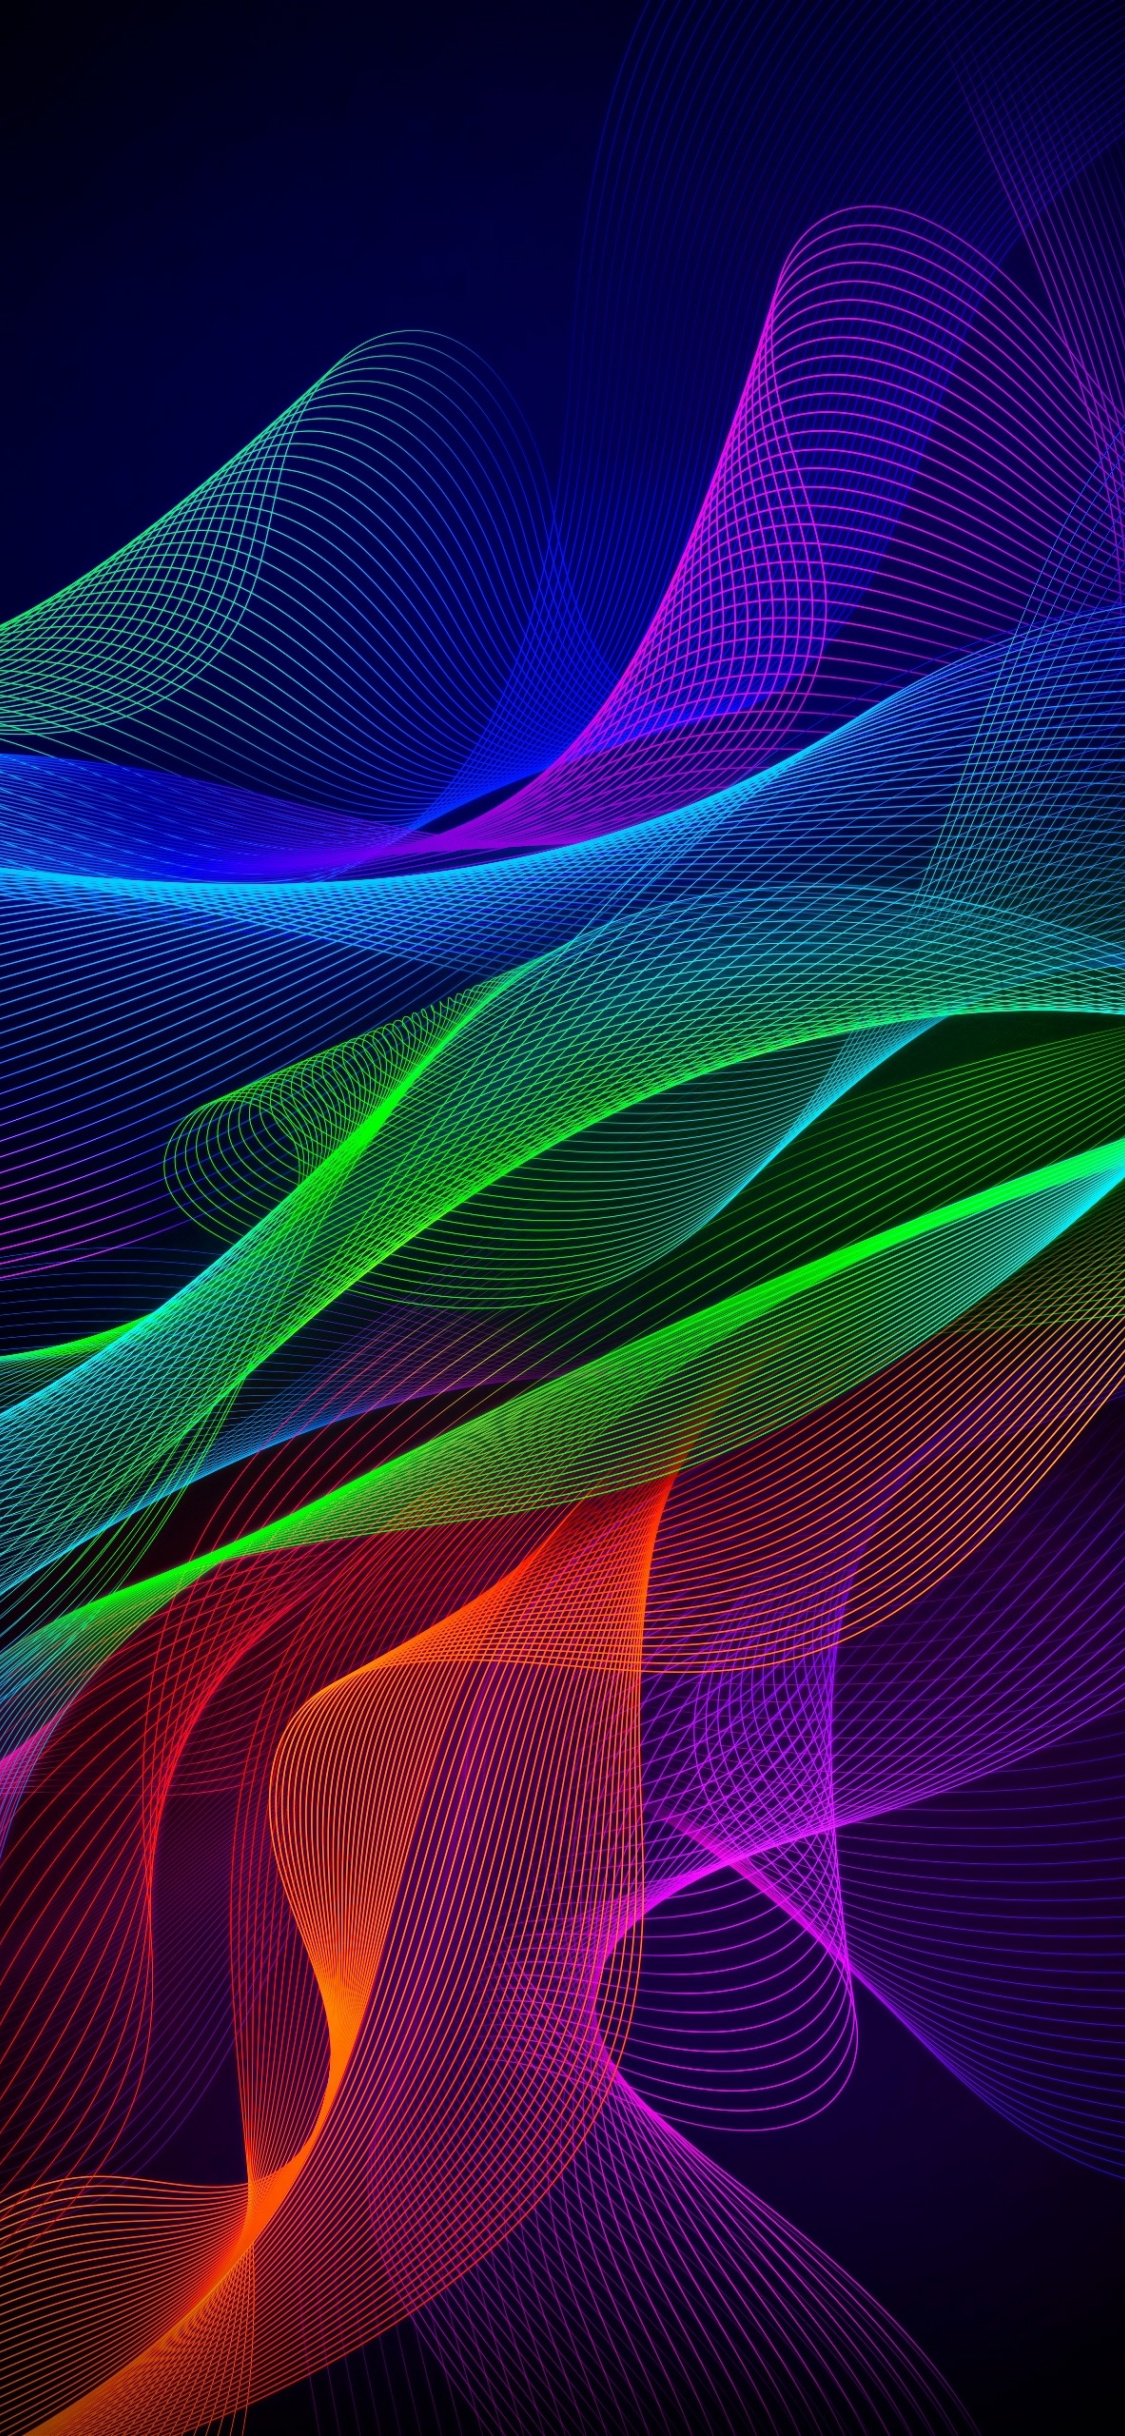 Download 1125x2436 wallpaper colorful lines, abstract, razer